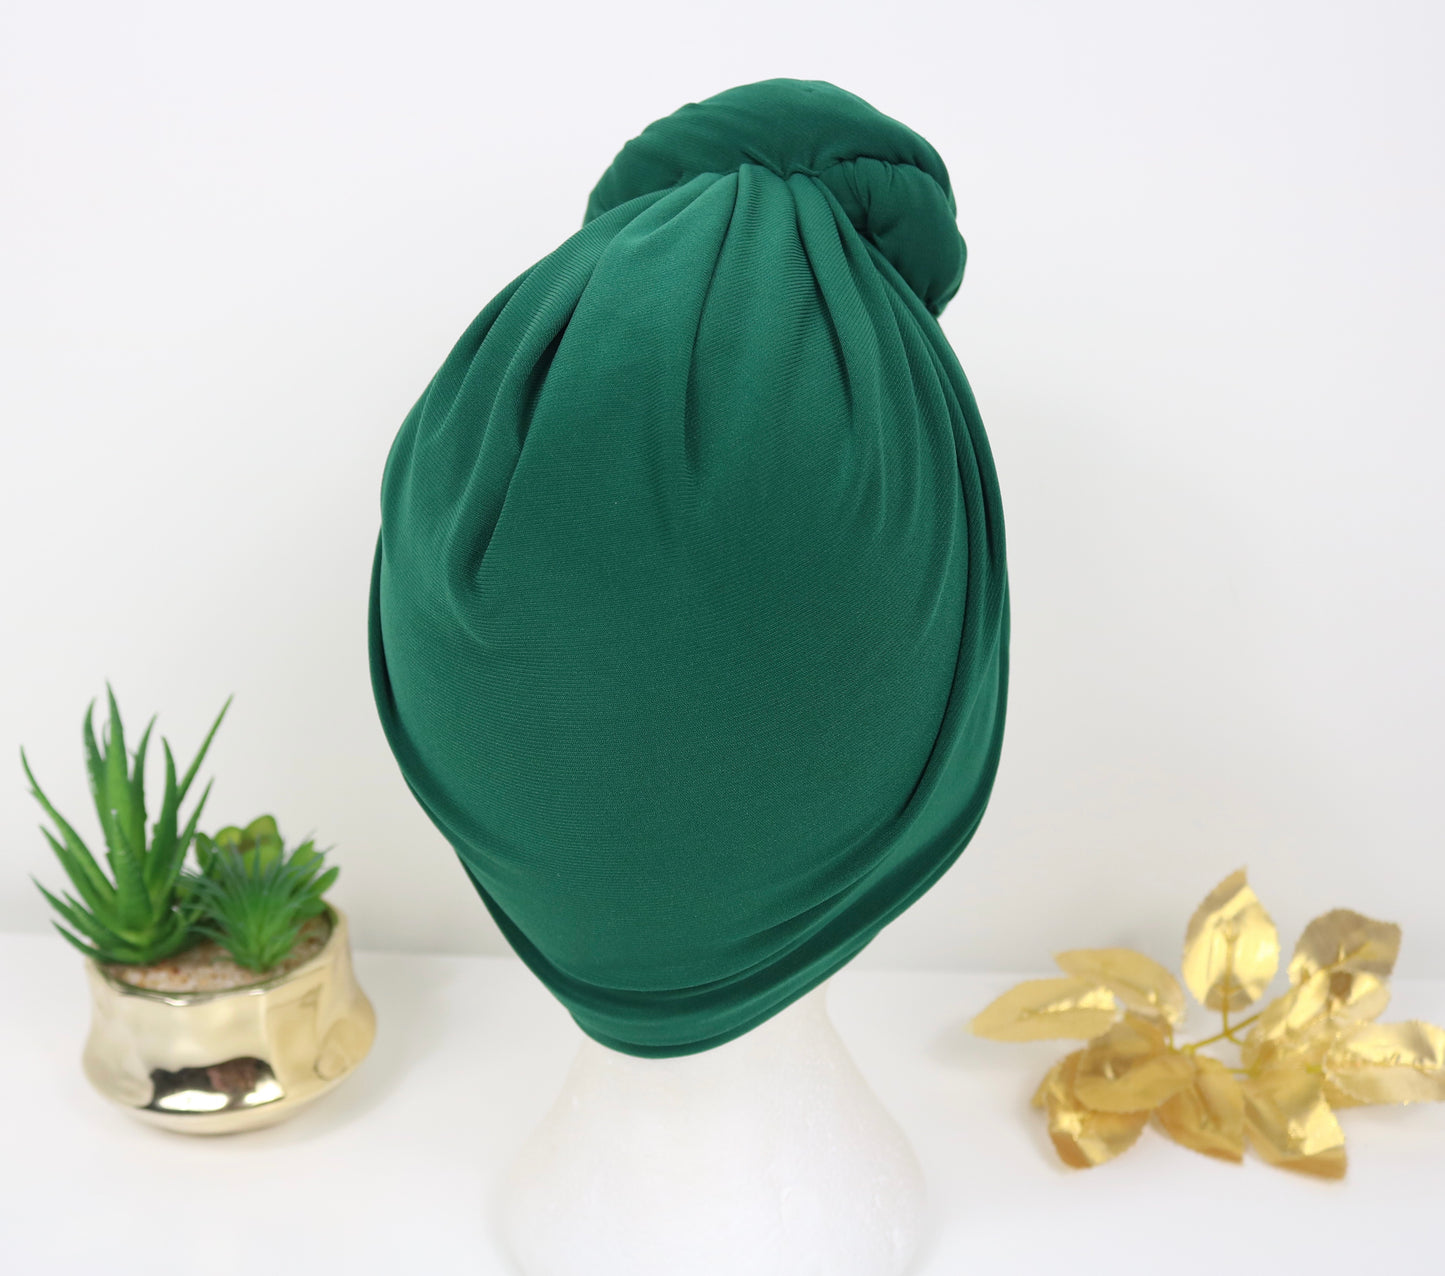 Forest green - Full coverage Turban